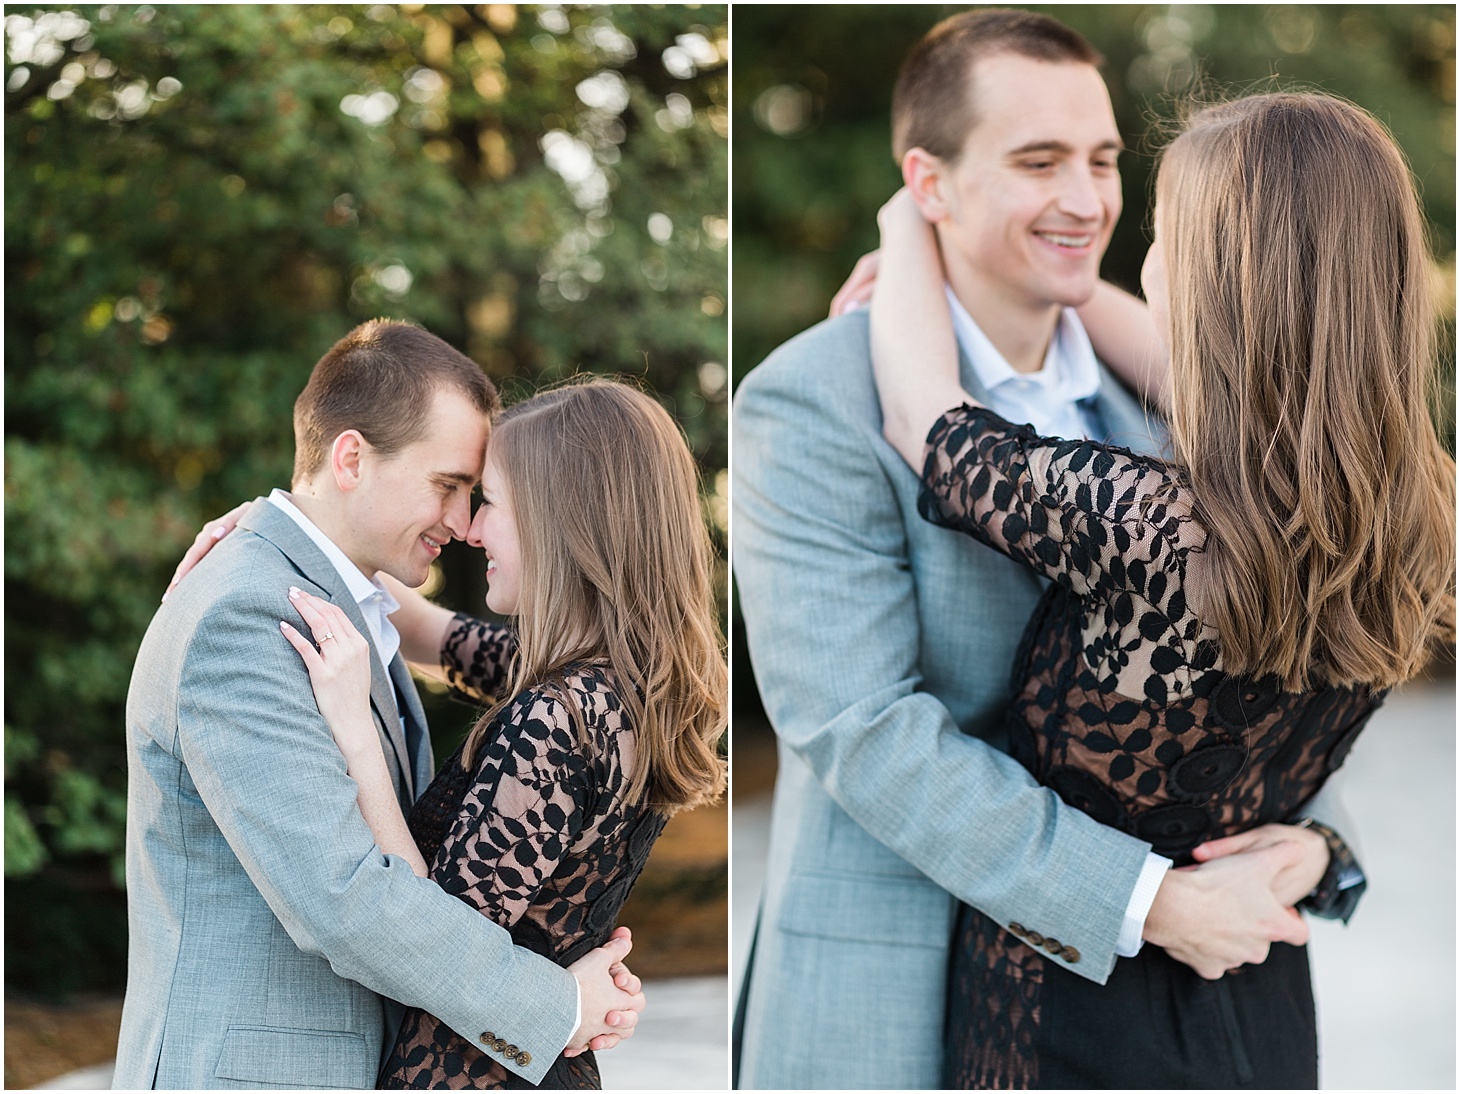 Morning Engagement Portraits in Washington, DC | Jefferson Memorial and Georgetown Sunrise Engagement Session | Sarah Bradshaw Photography